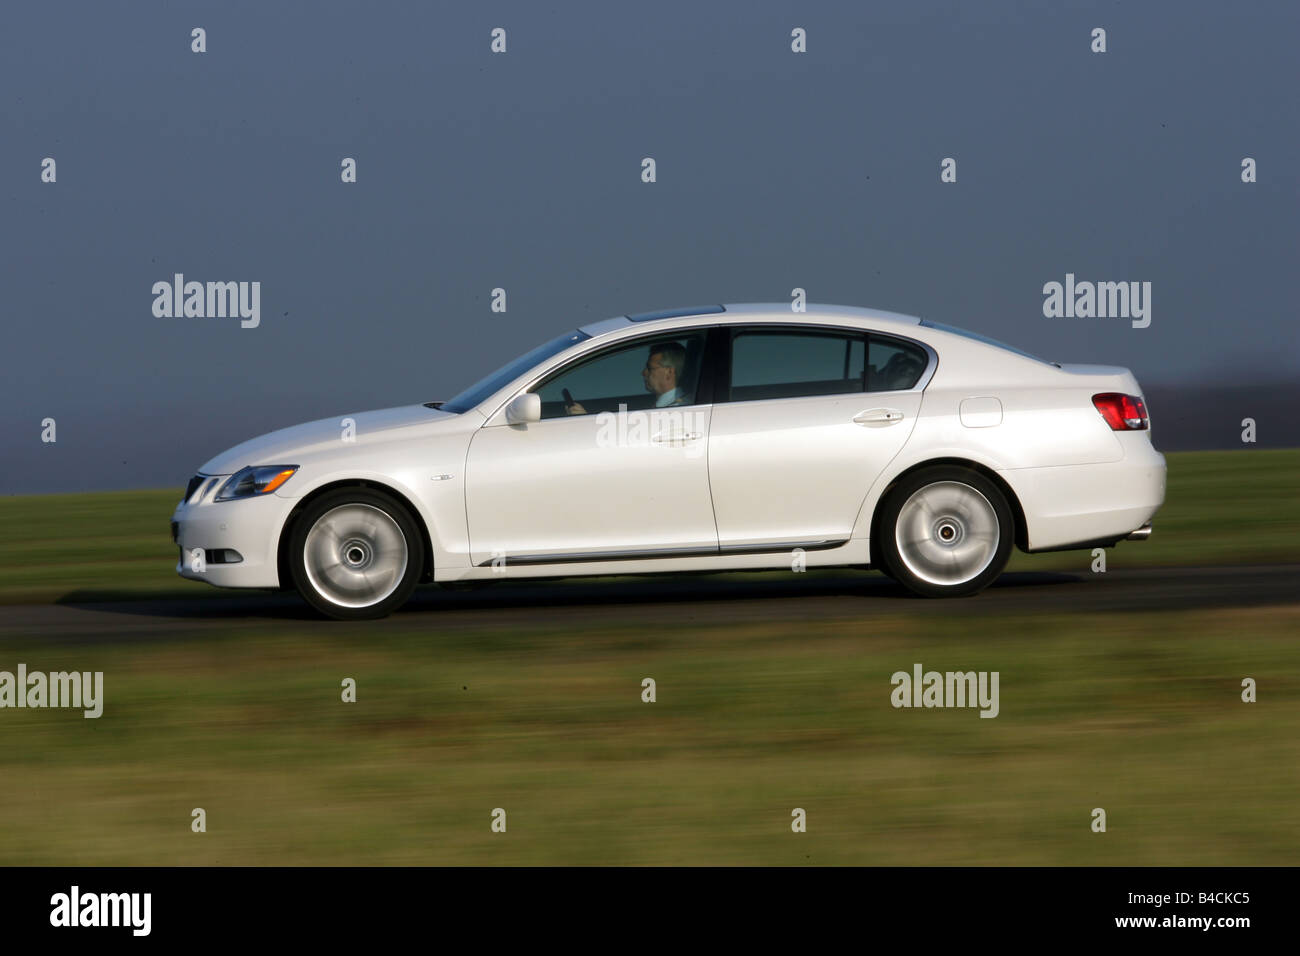 Lexus GS 540 h, model year 2006-, white, driving, side view, country road, Hybrid model, Hybrid , Hybrid approx. Stock Photo